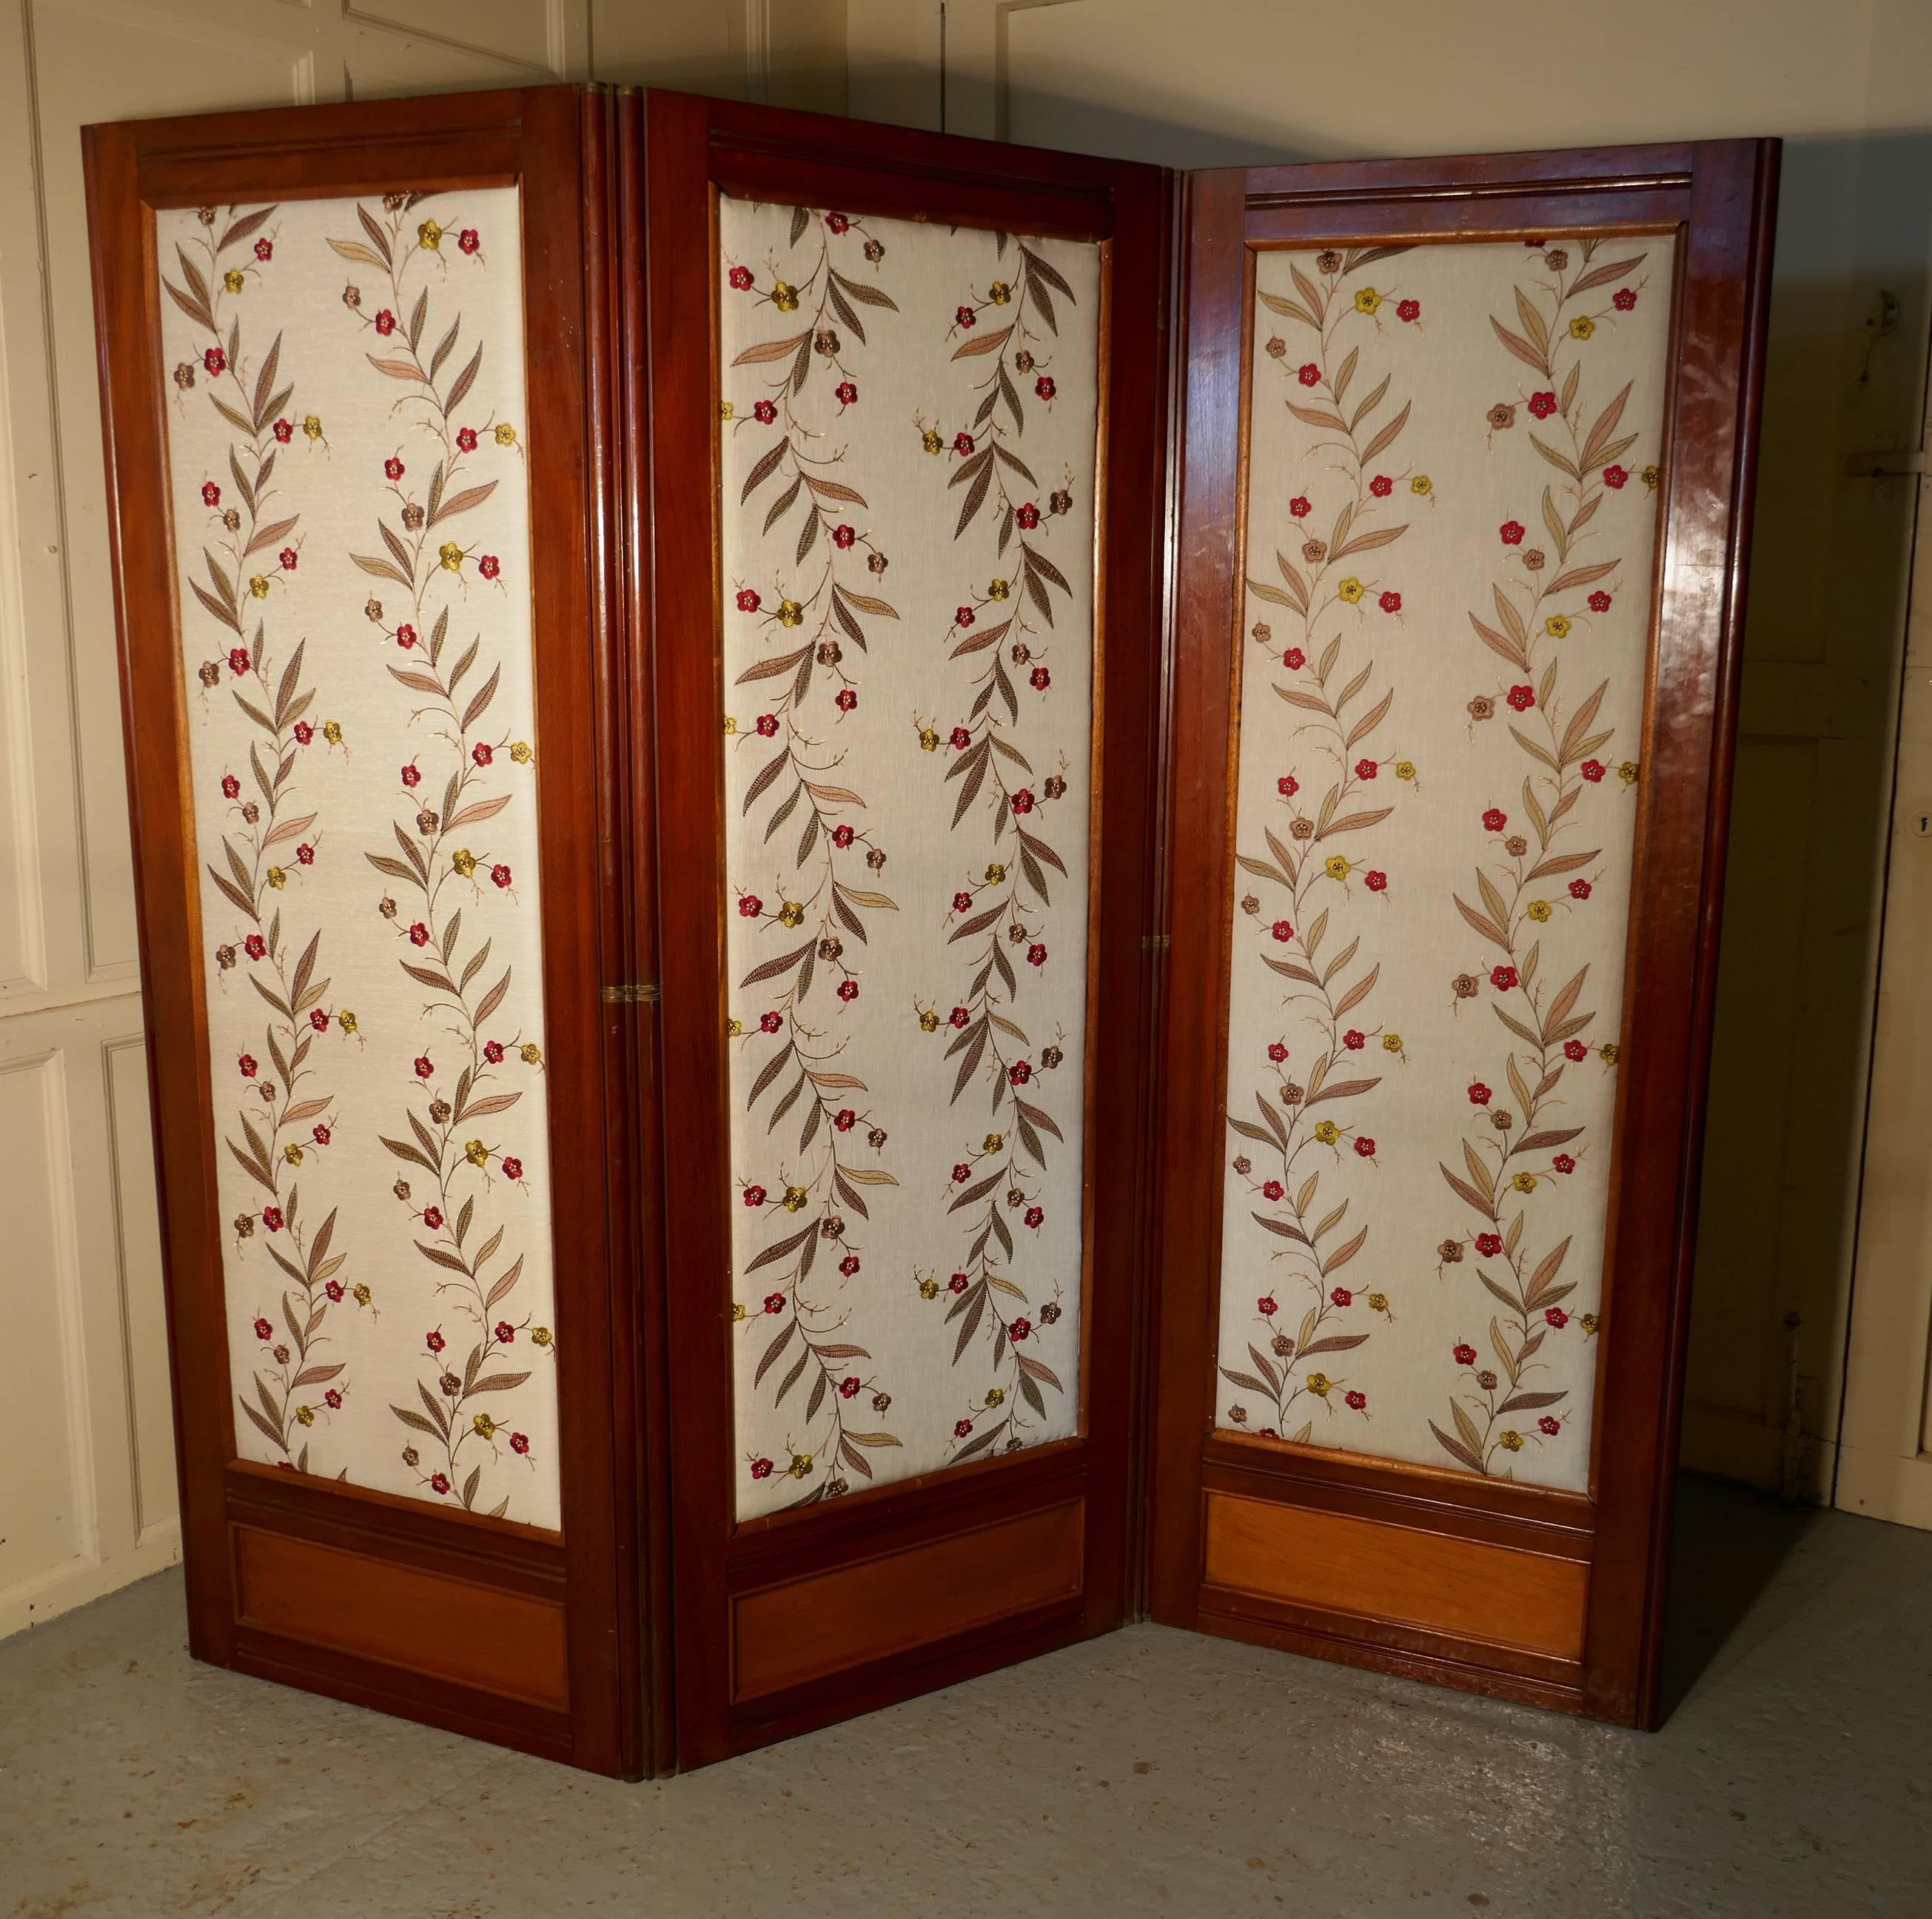 Victorian three-fold mahogany dressing screen with upholstered panels


Victorian three fold mahogany dressing screen, room divider with upholstered panels

This is a superior quality piece, the frame is in very heavy solid mahogany and has